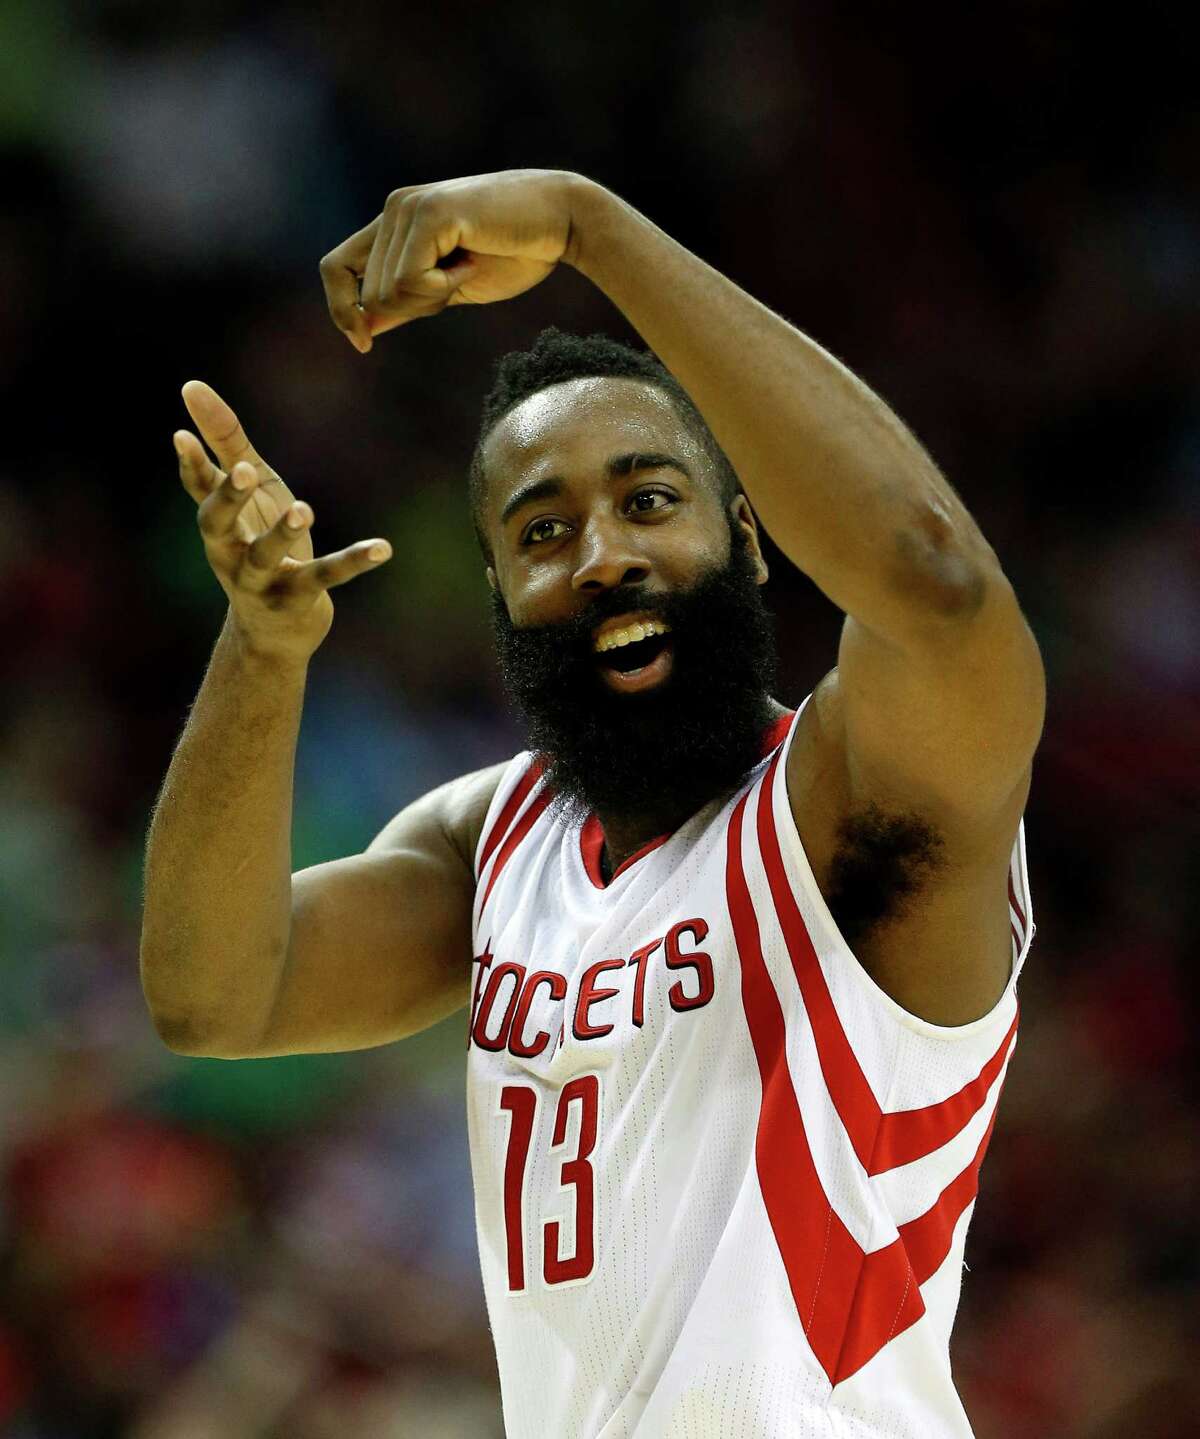 Houston Rockets guard James Harden (13) signals stirring the pot after his three-pointer during the second half of an NBA game at Toyota Center, Tuesday, March 17, 2015, in Houston. Rockets won 107-94.